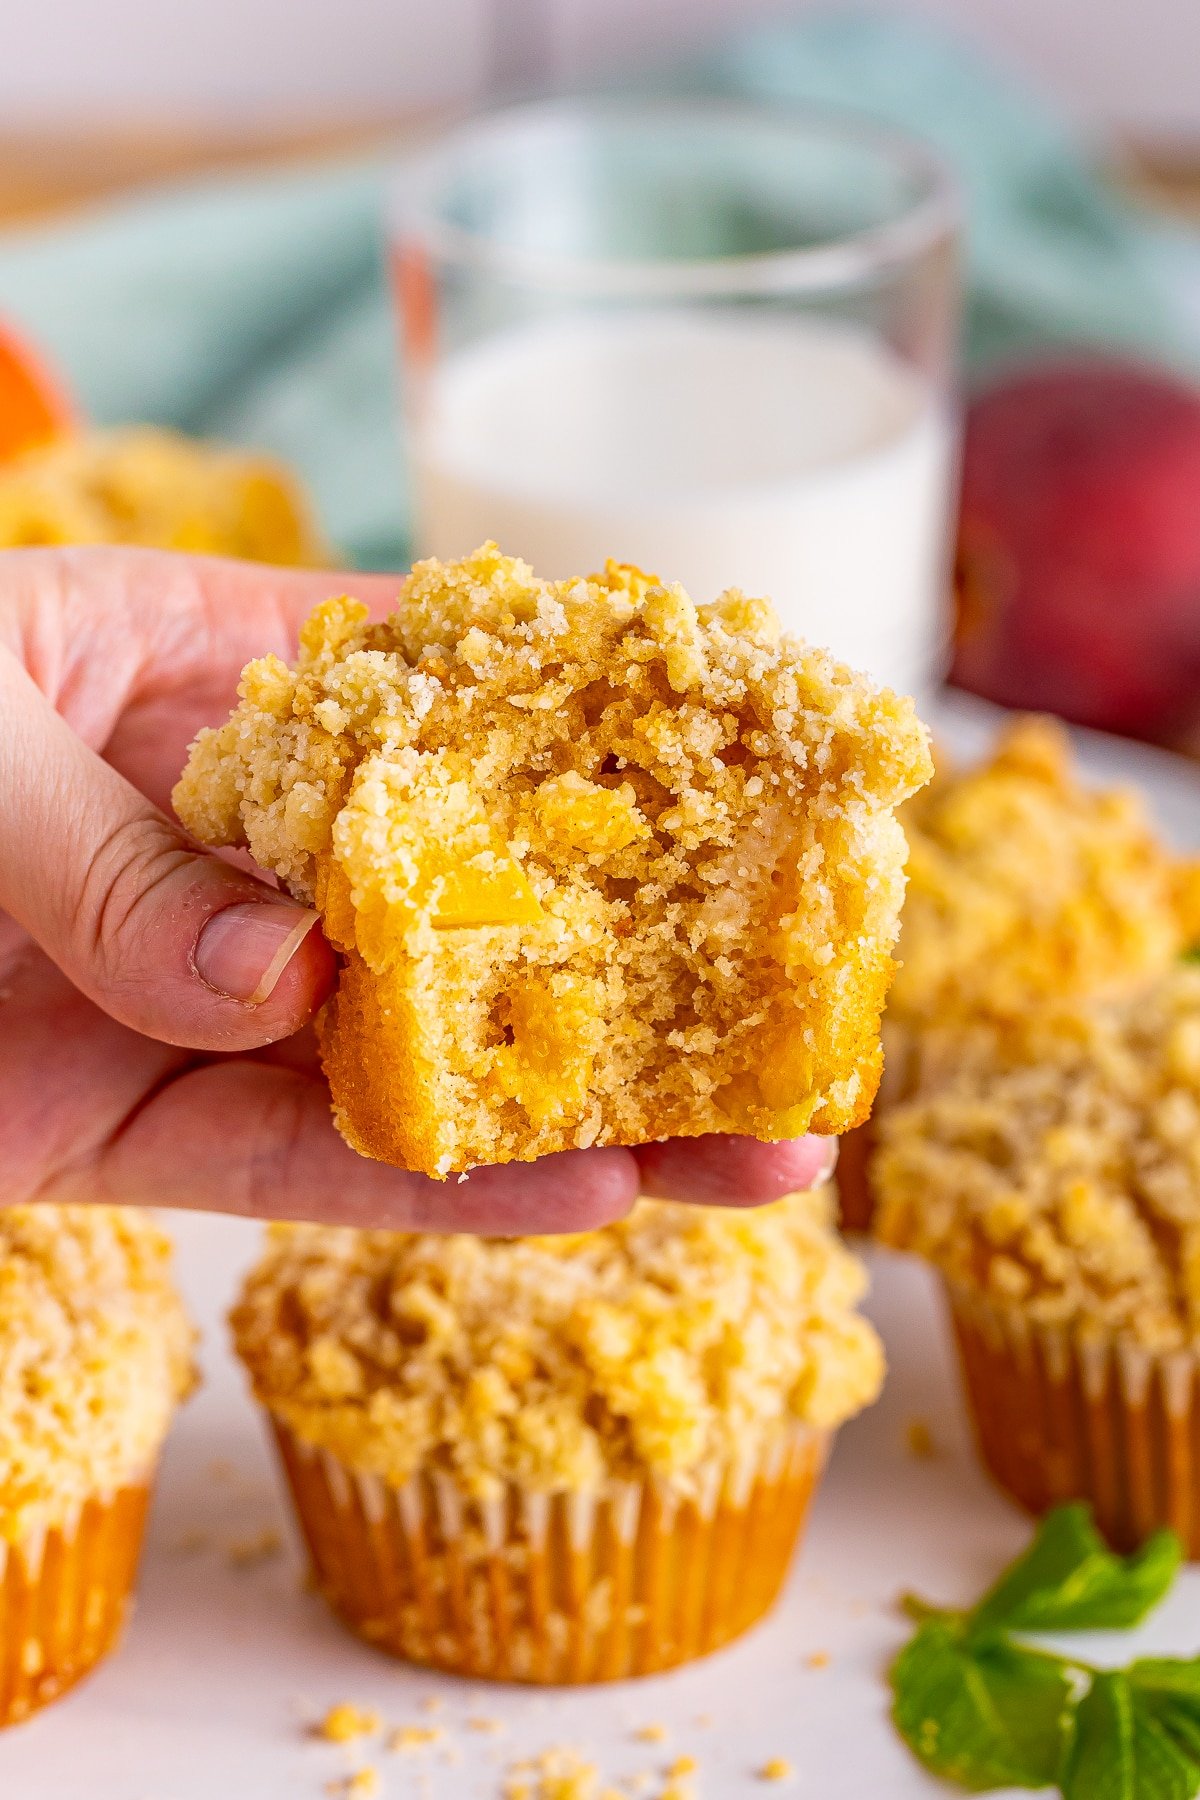 a hand holding a peach muffin with a bite taken out to show the interior